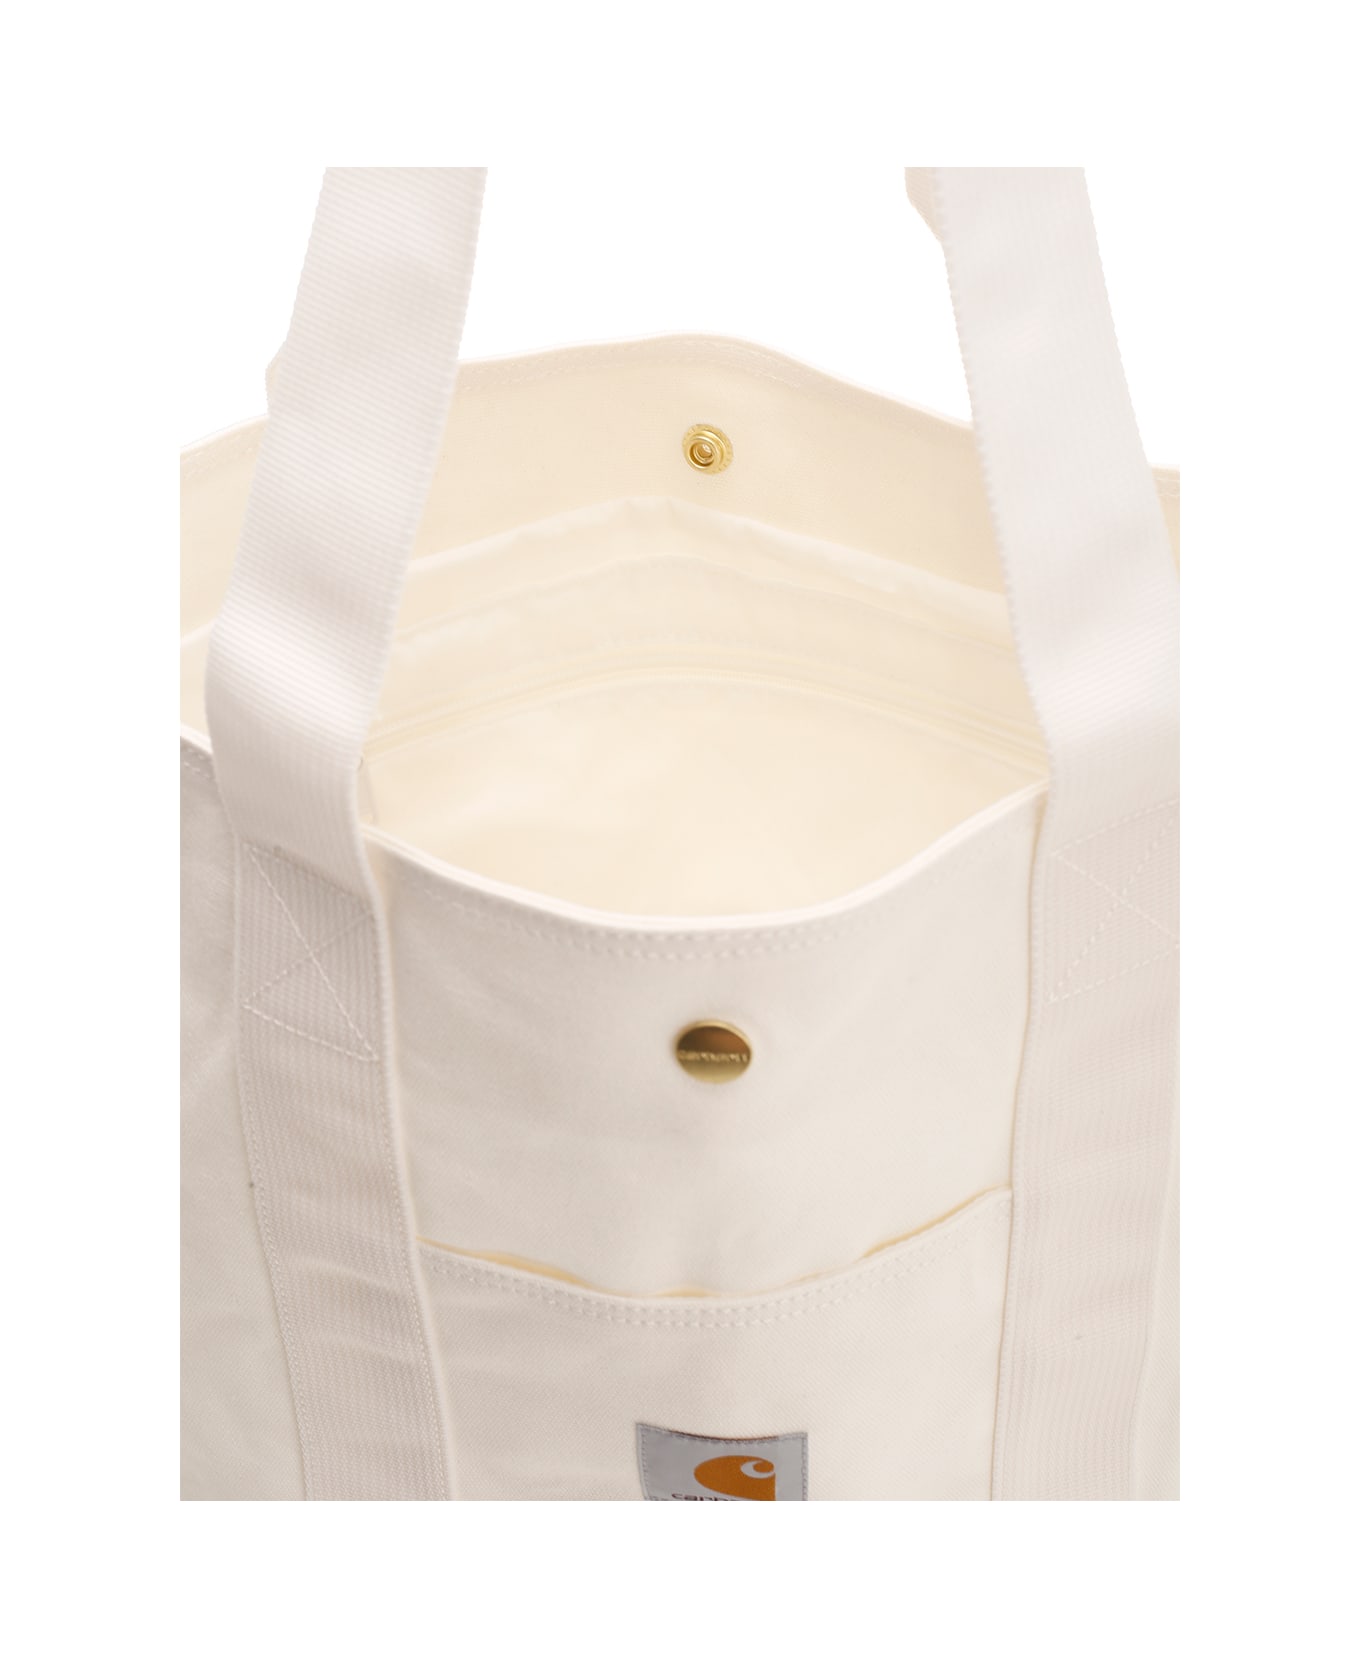 Carhartt 'dearborn' Canvas Tote Bag - WHITE トートバッグ